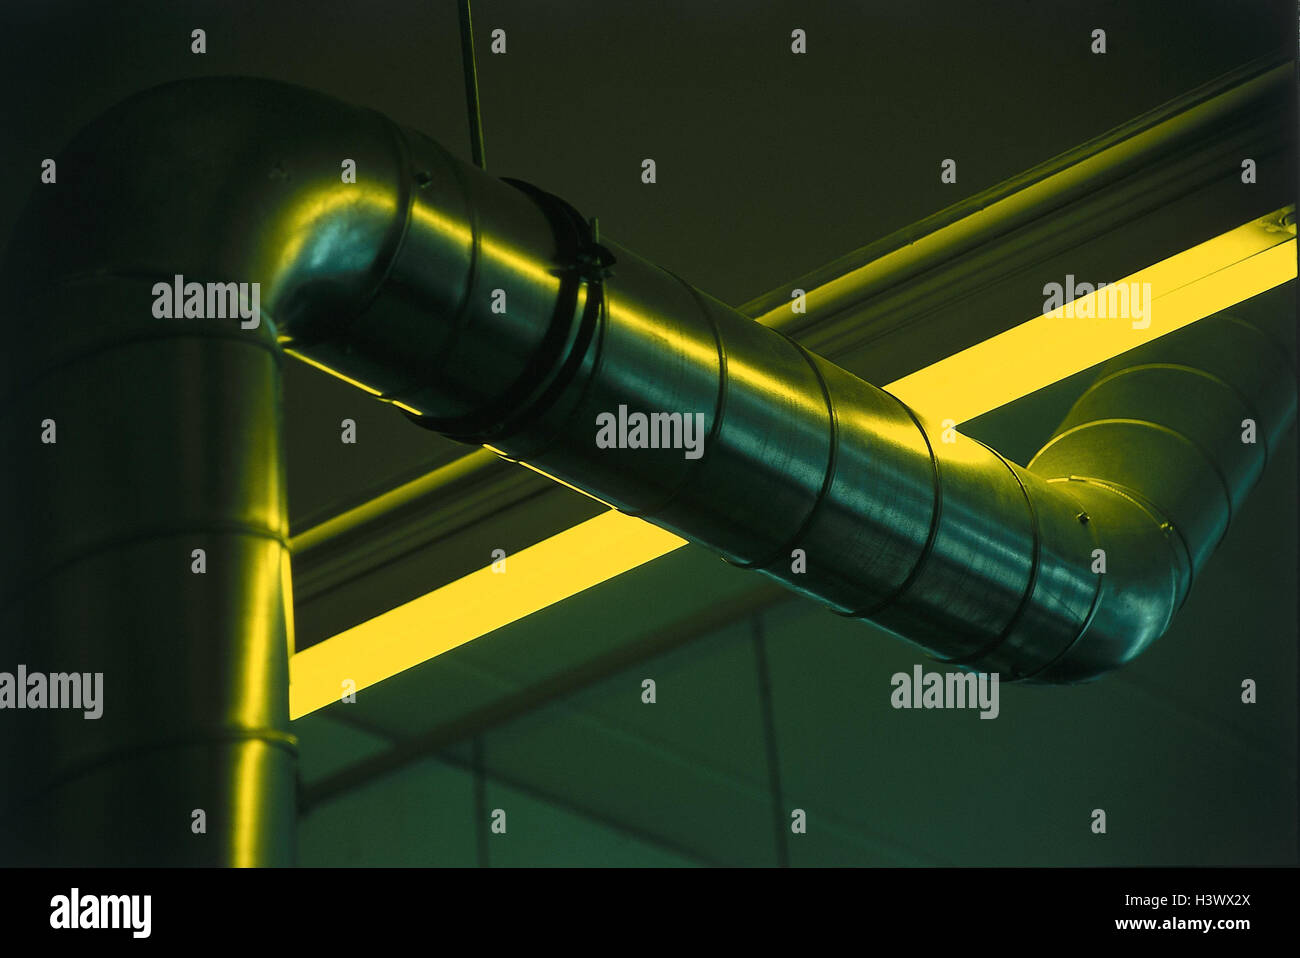 Printers, pressure plate exposure, detail, air pipe, yellow light exposure, light, yellow, air shaft, ventilation, pipe, exhaust air, product photography, Germany, Bavaria, Wemding Stock Photo